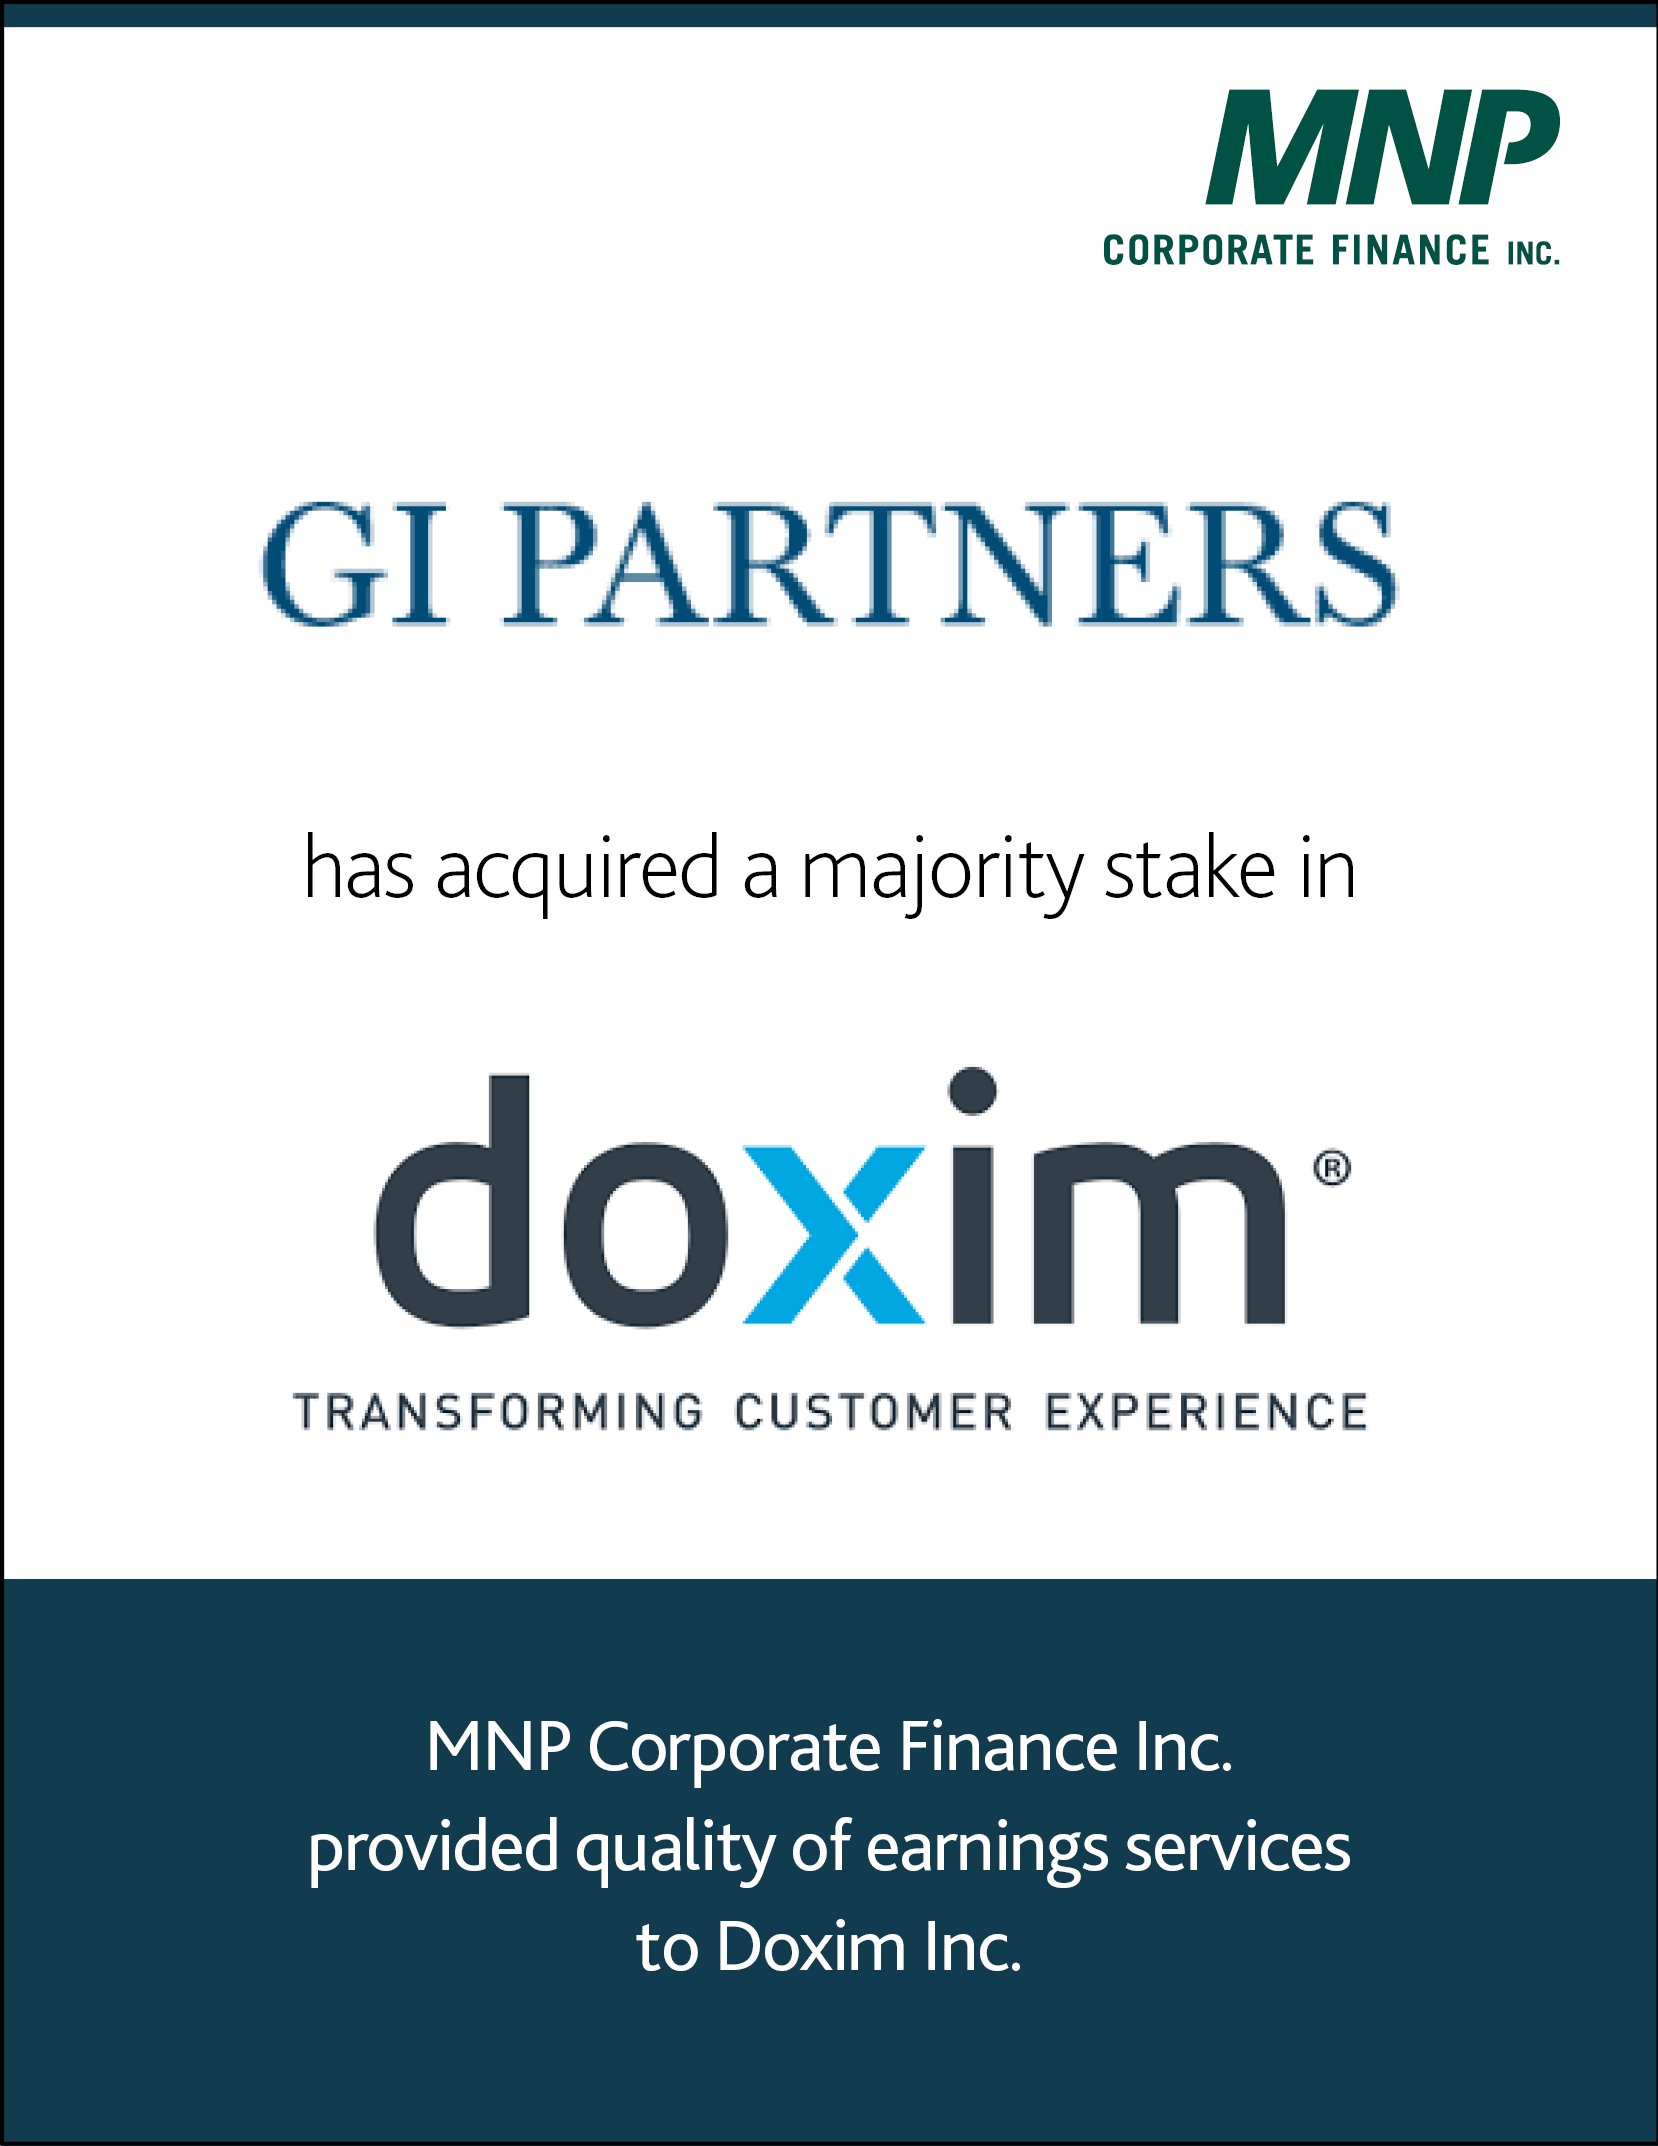 GI Partners has acquired a majority stake in Doxim Inc.